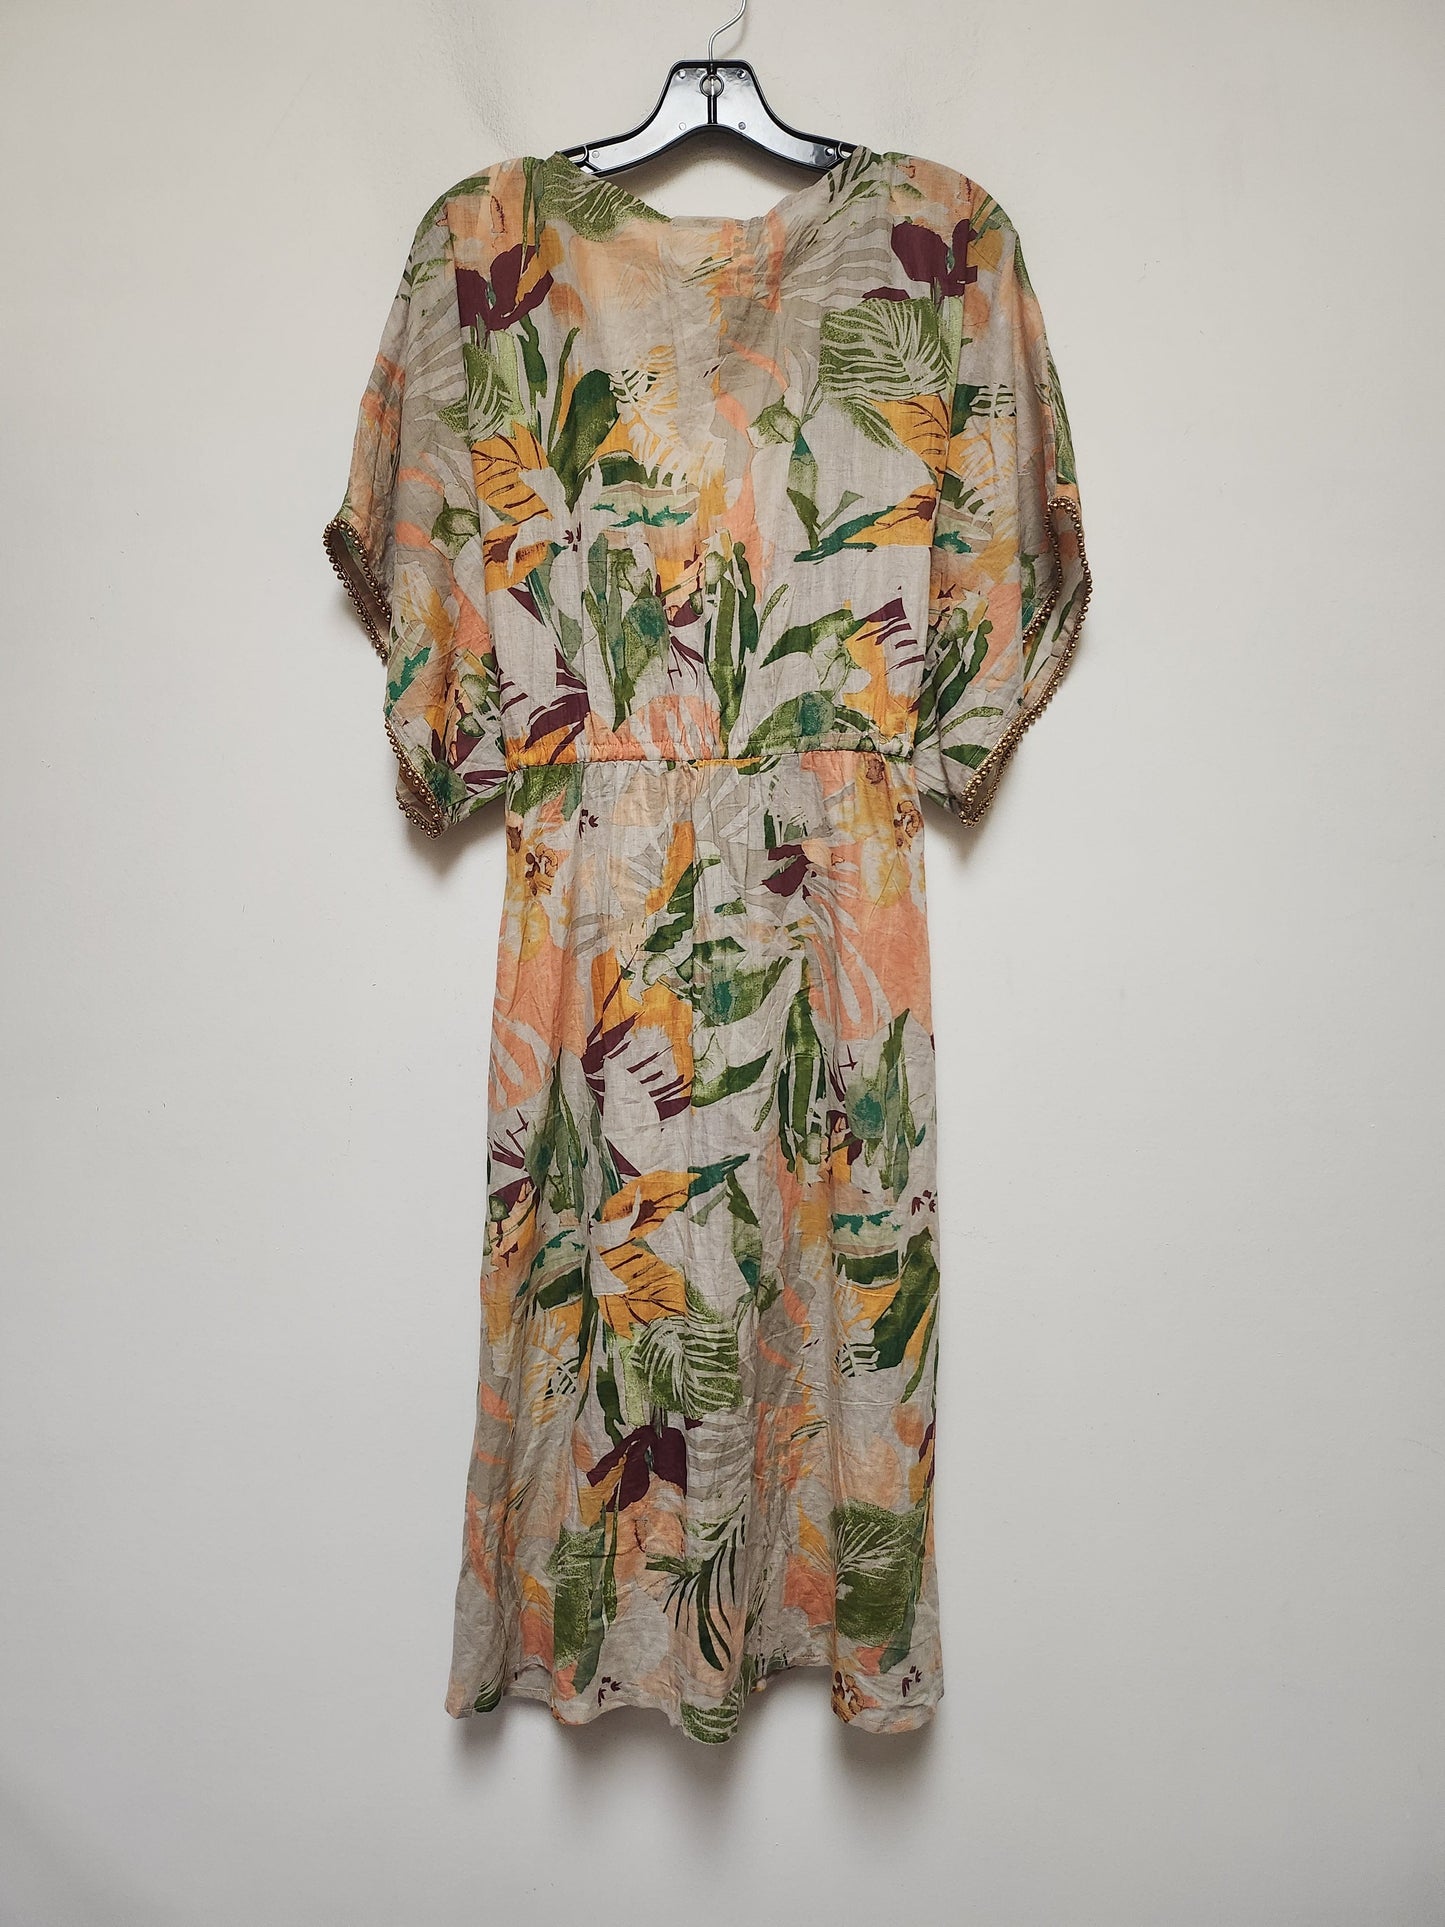 Tropical Print Swimwear Cover-up Clothes Mentor, Size S